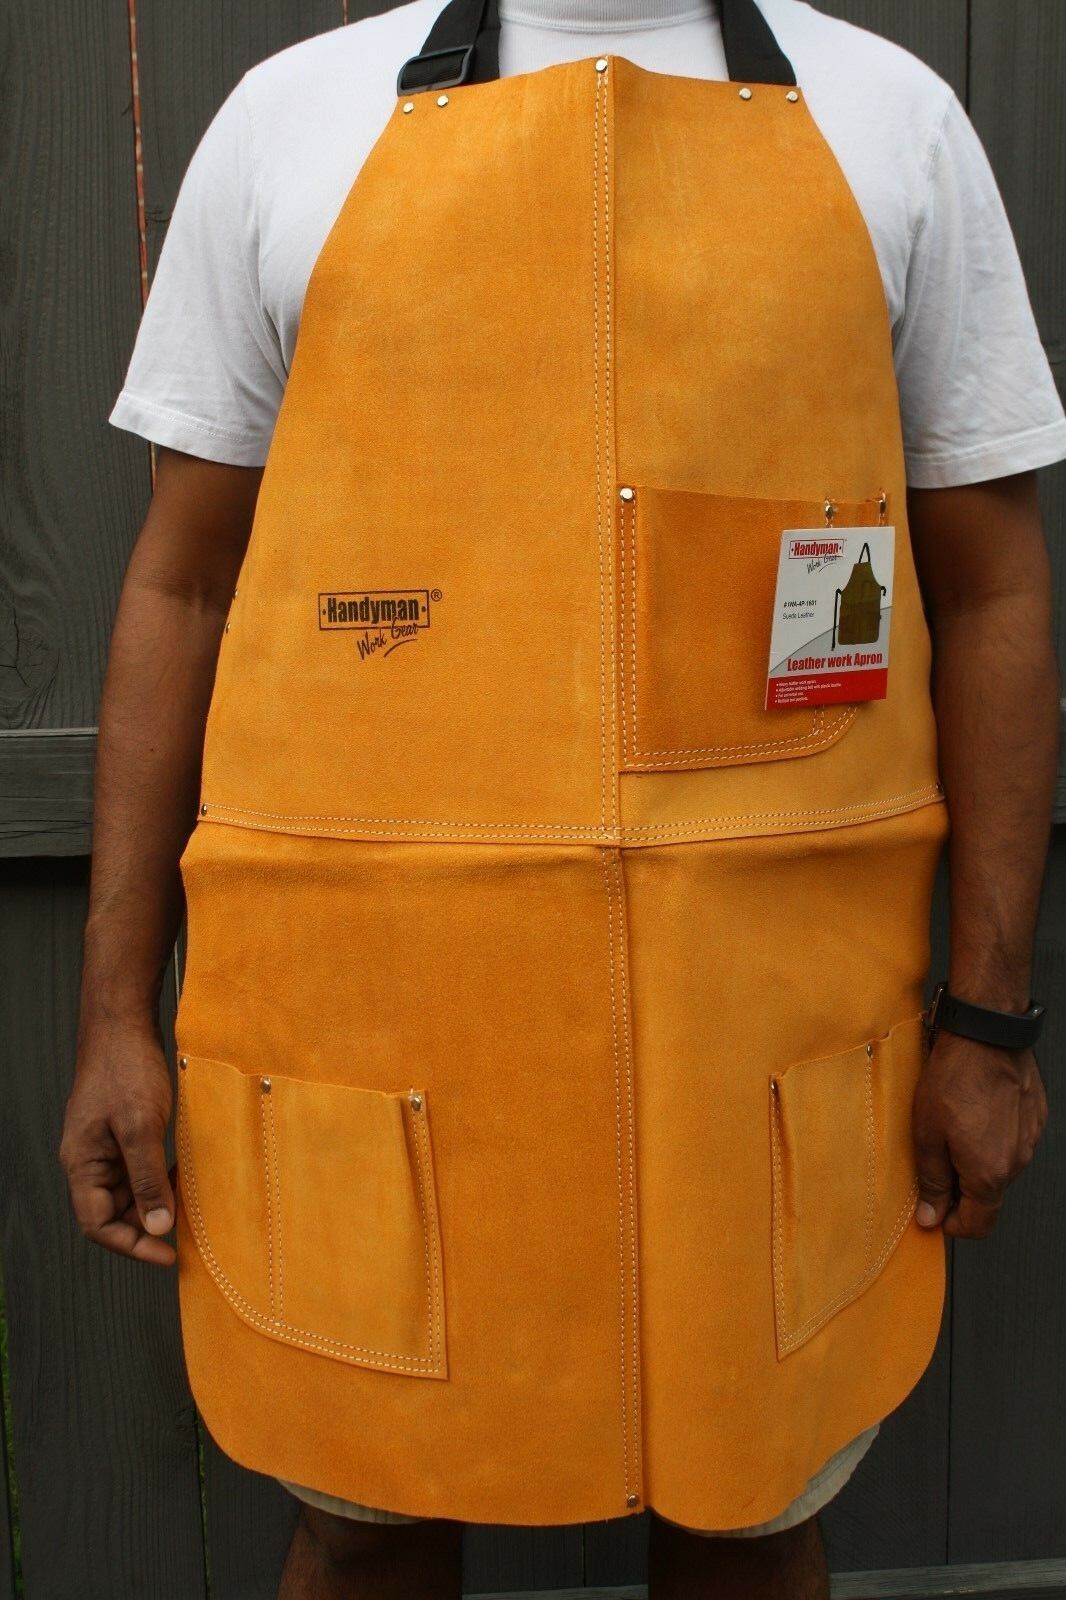 Leather Welding Apron Heat Resistant Work Safety Insulated Bib With Pockets 34"